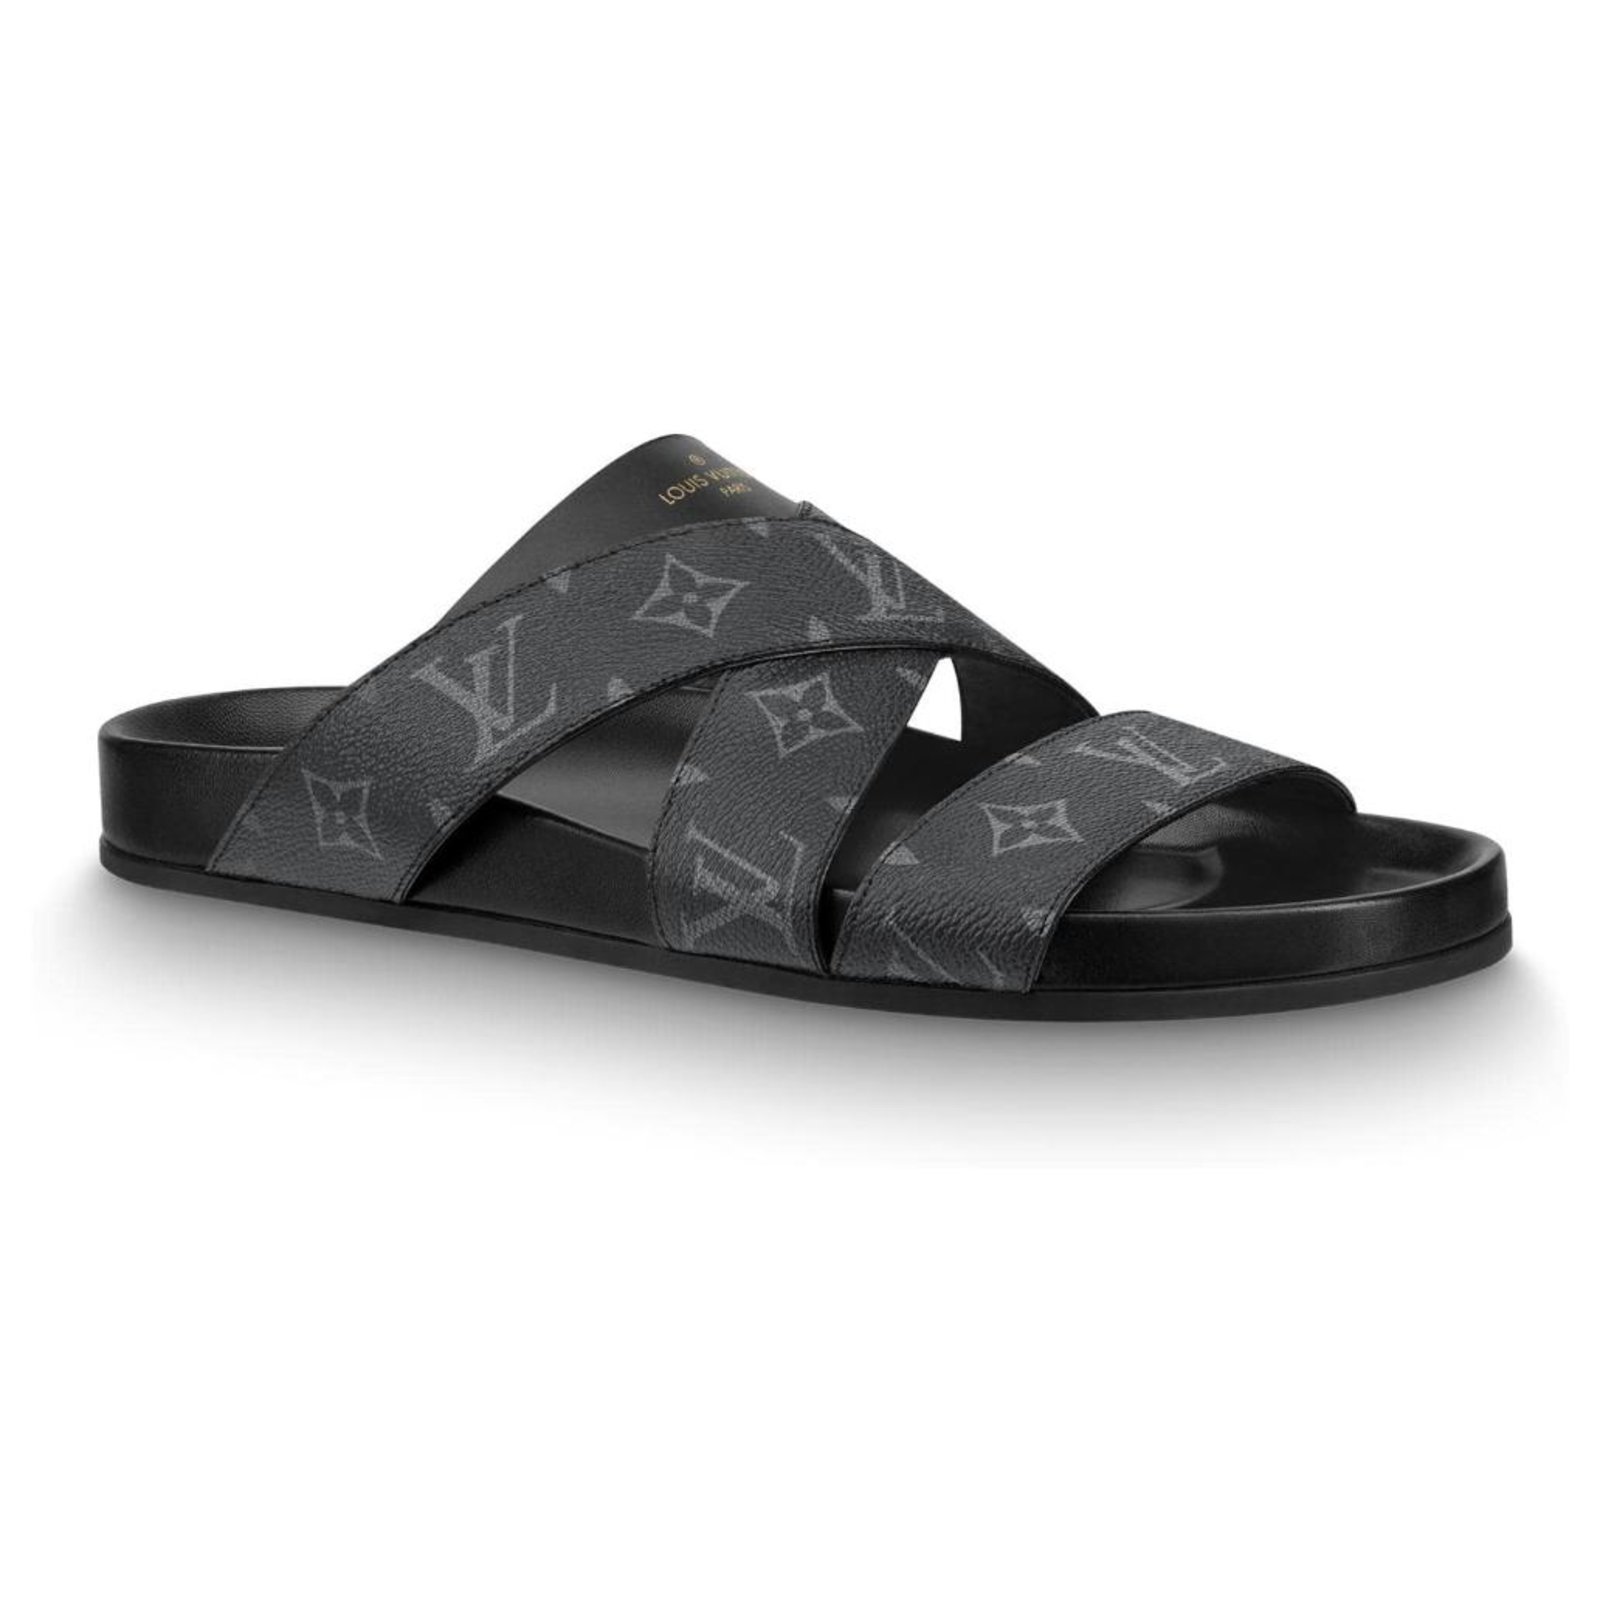 Louis Vuitton Grey Home Slippers - USALast